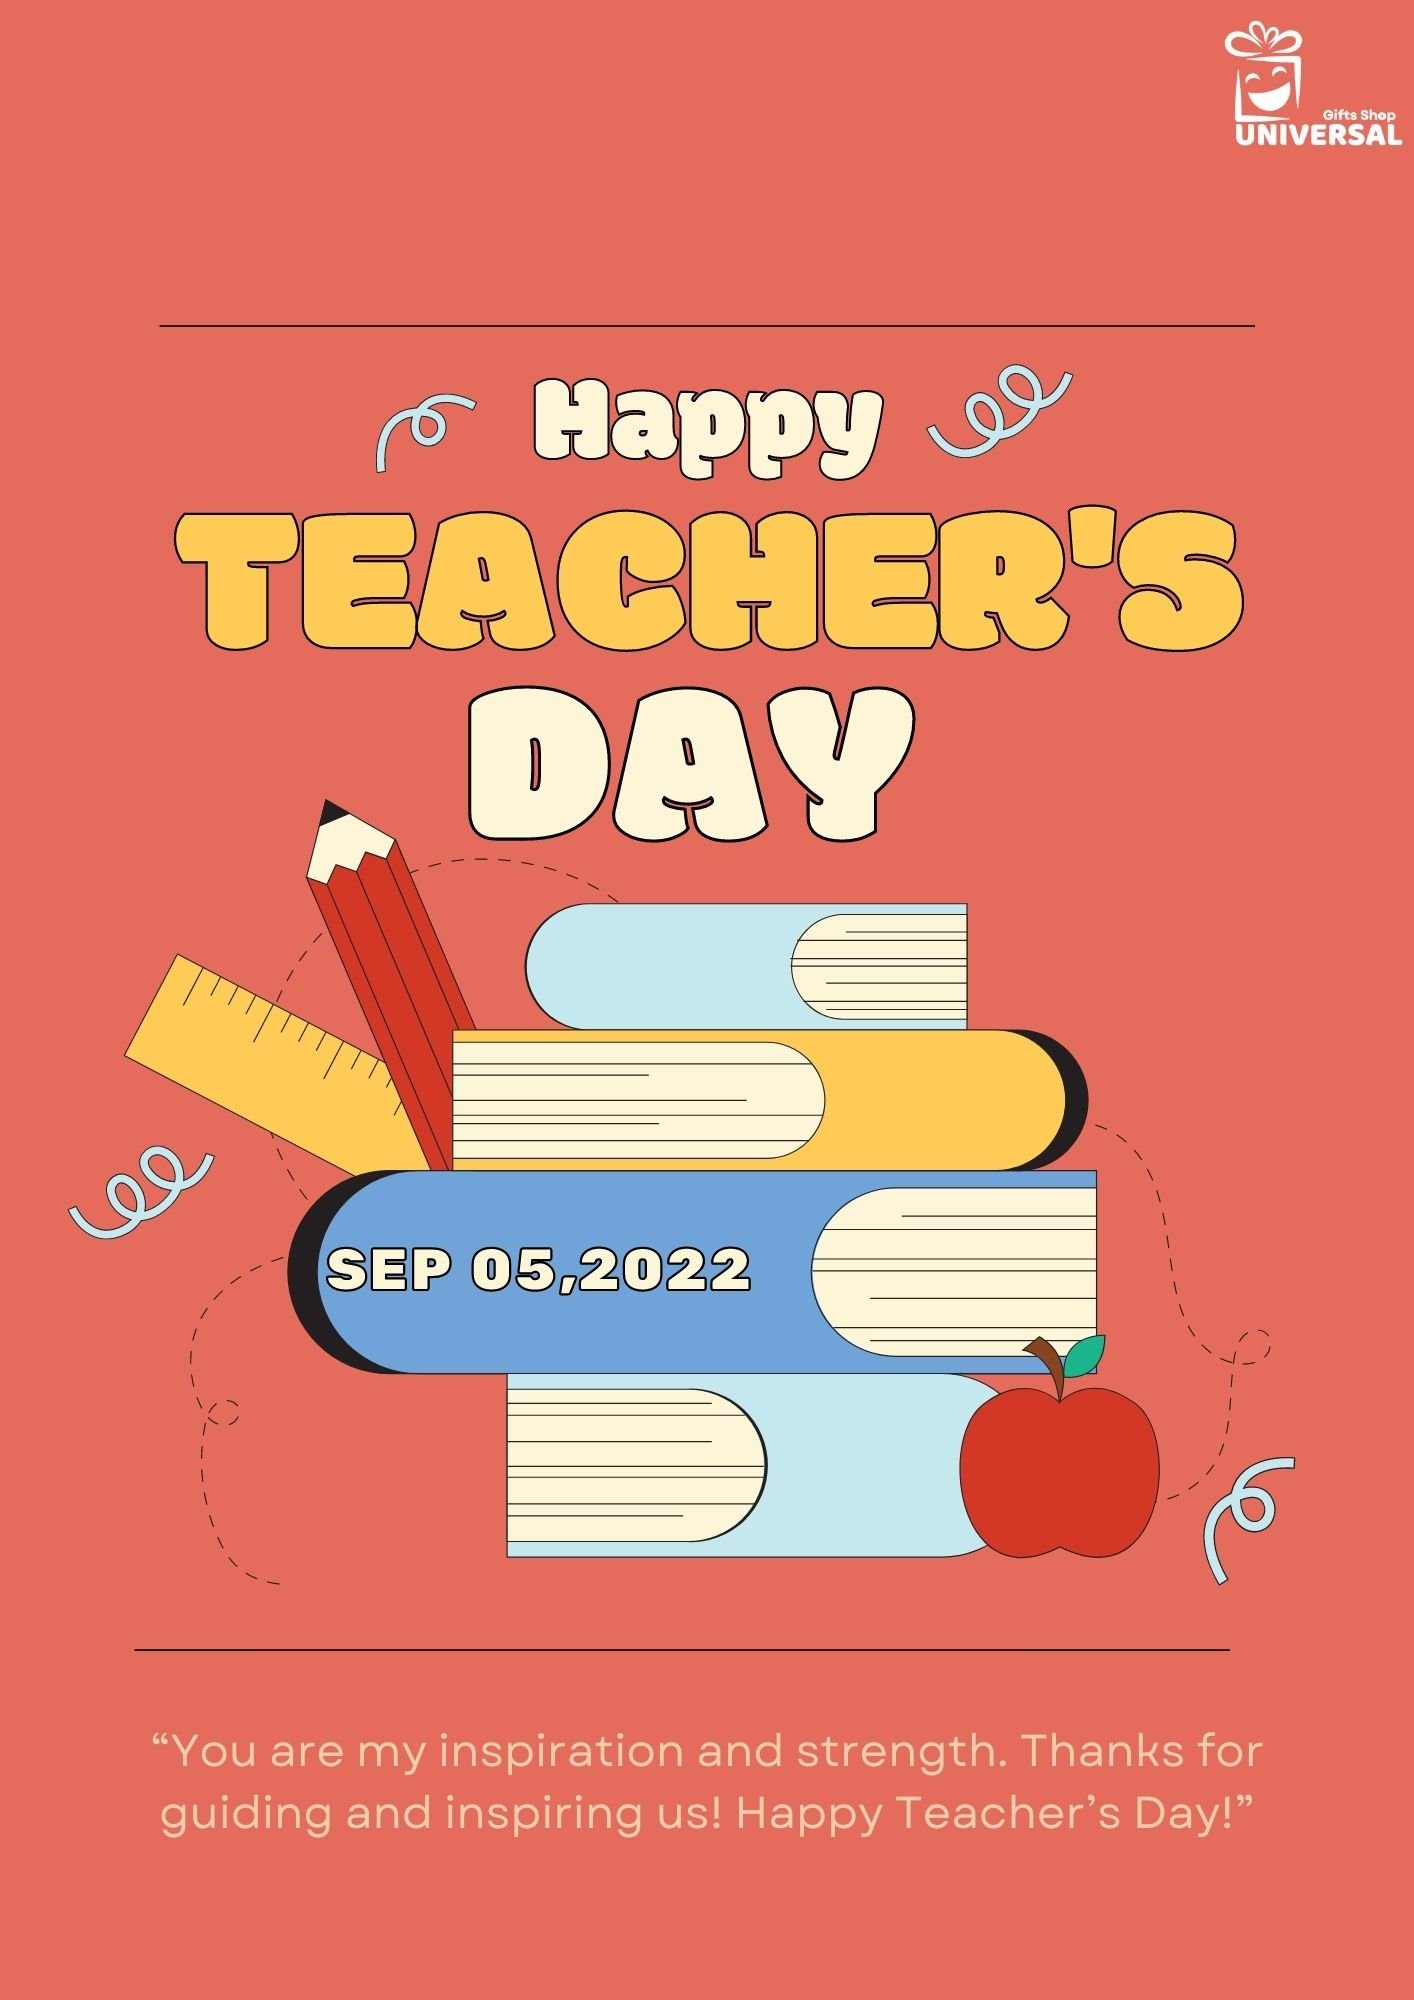 Happy Teachers Day 2022. Teachers Day Wishes, Greetings & Image Universe Online